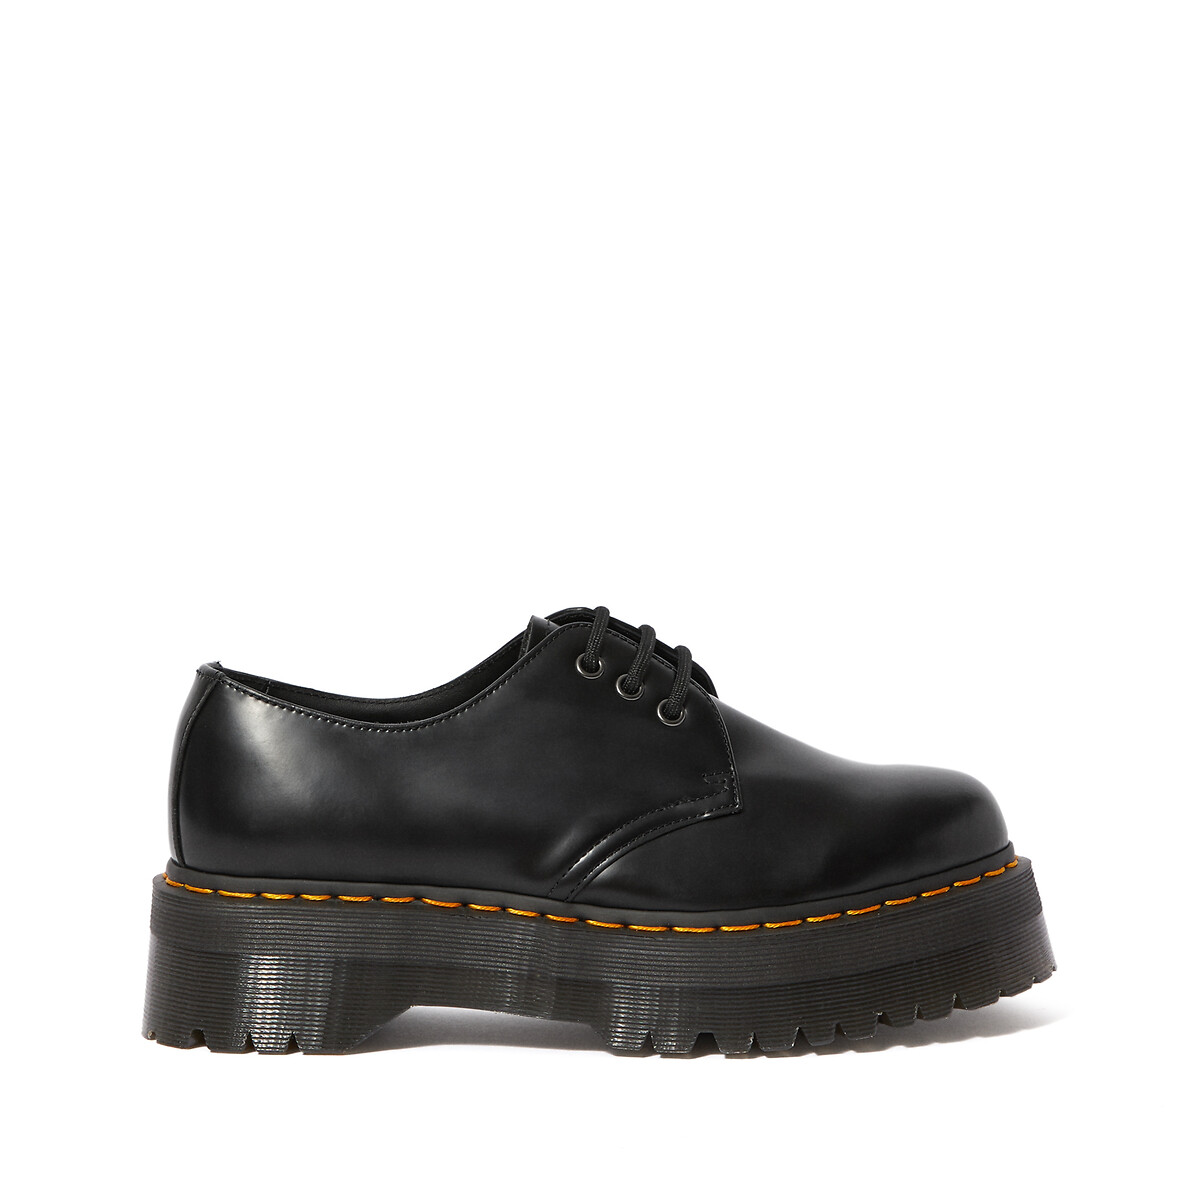 Image of 1461 Quad Platform Brogues in Leather